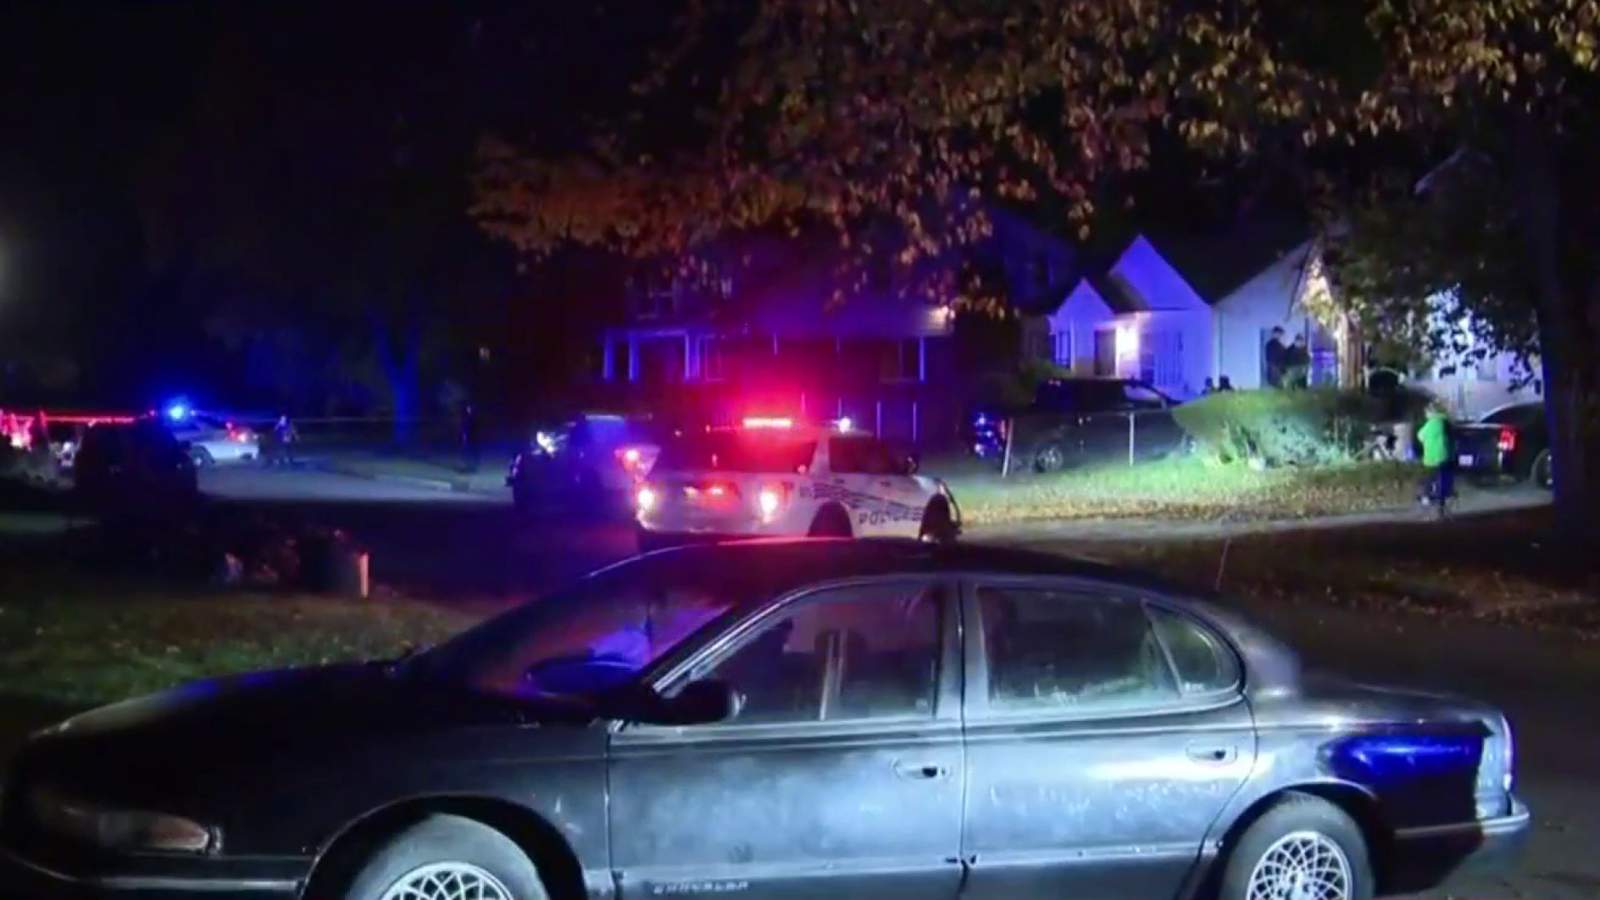 27-year-old man shot by intruders inside mother’s Detroit home